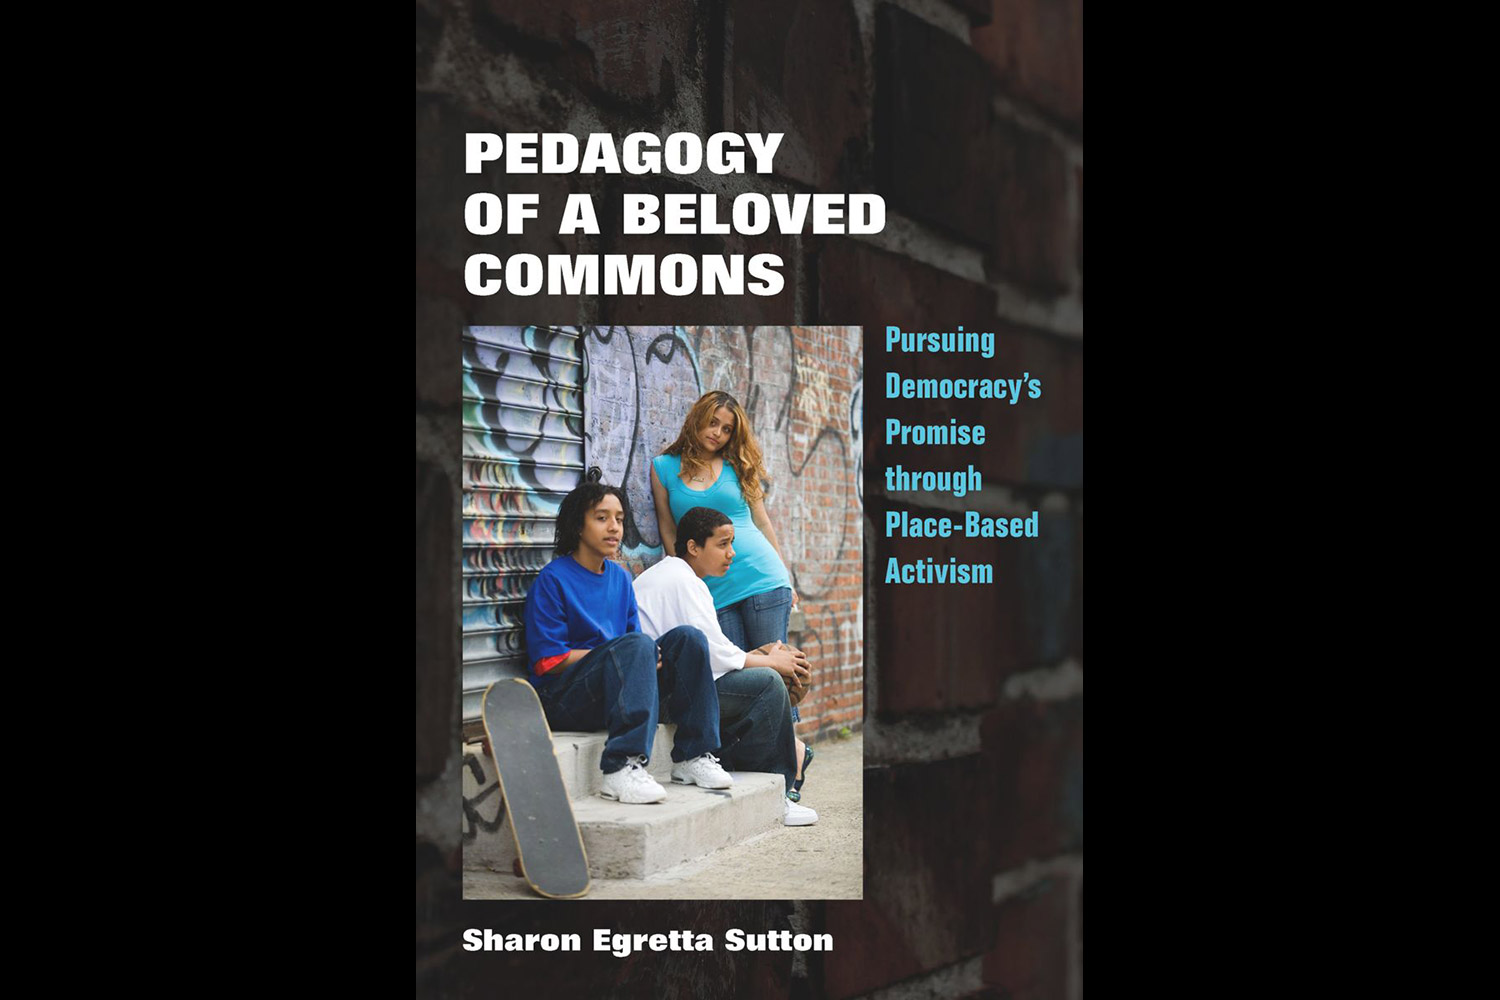 Book cover of "Pedagogy of a Beloved Commons" with an image of three people leaning against a wall on the street.